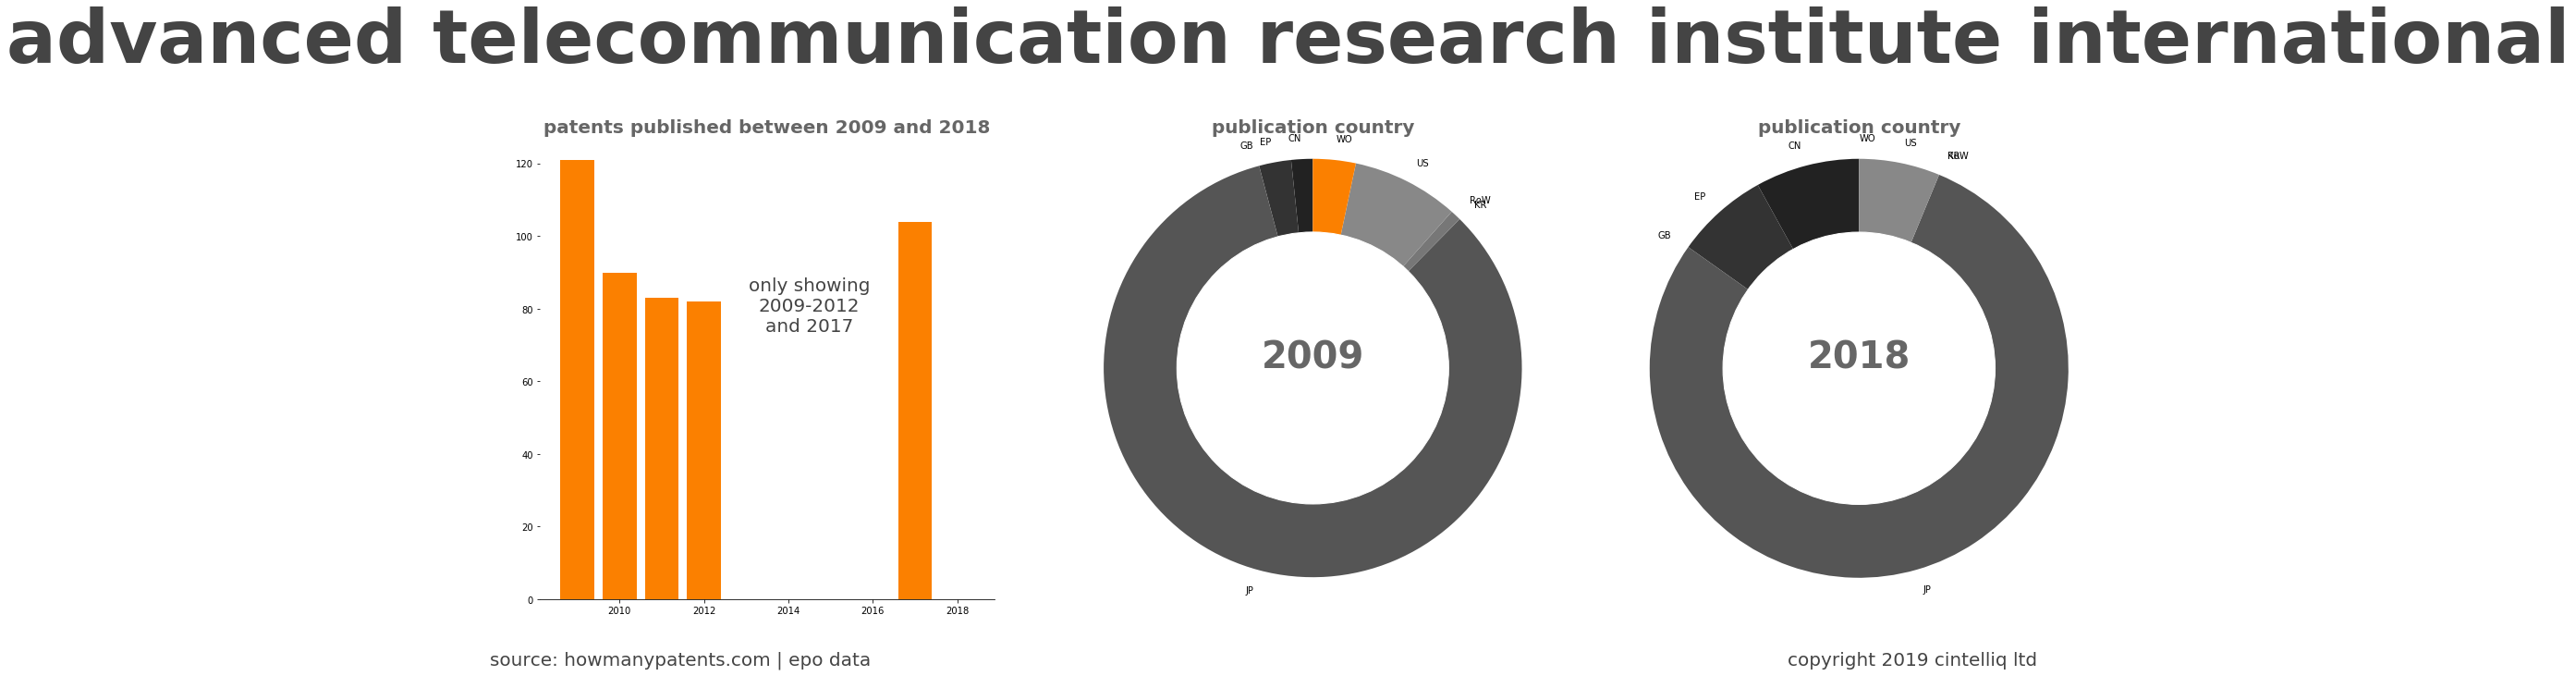 summary of patents for Advanced Telecommunication Research Institute International